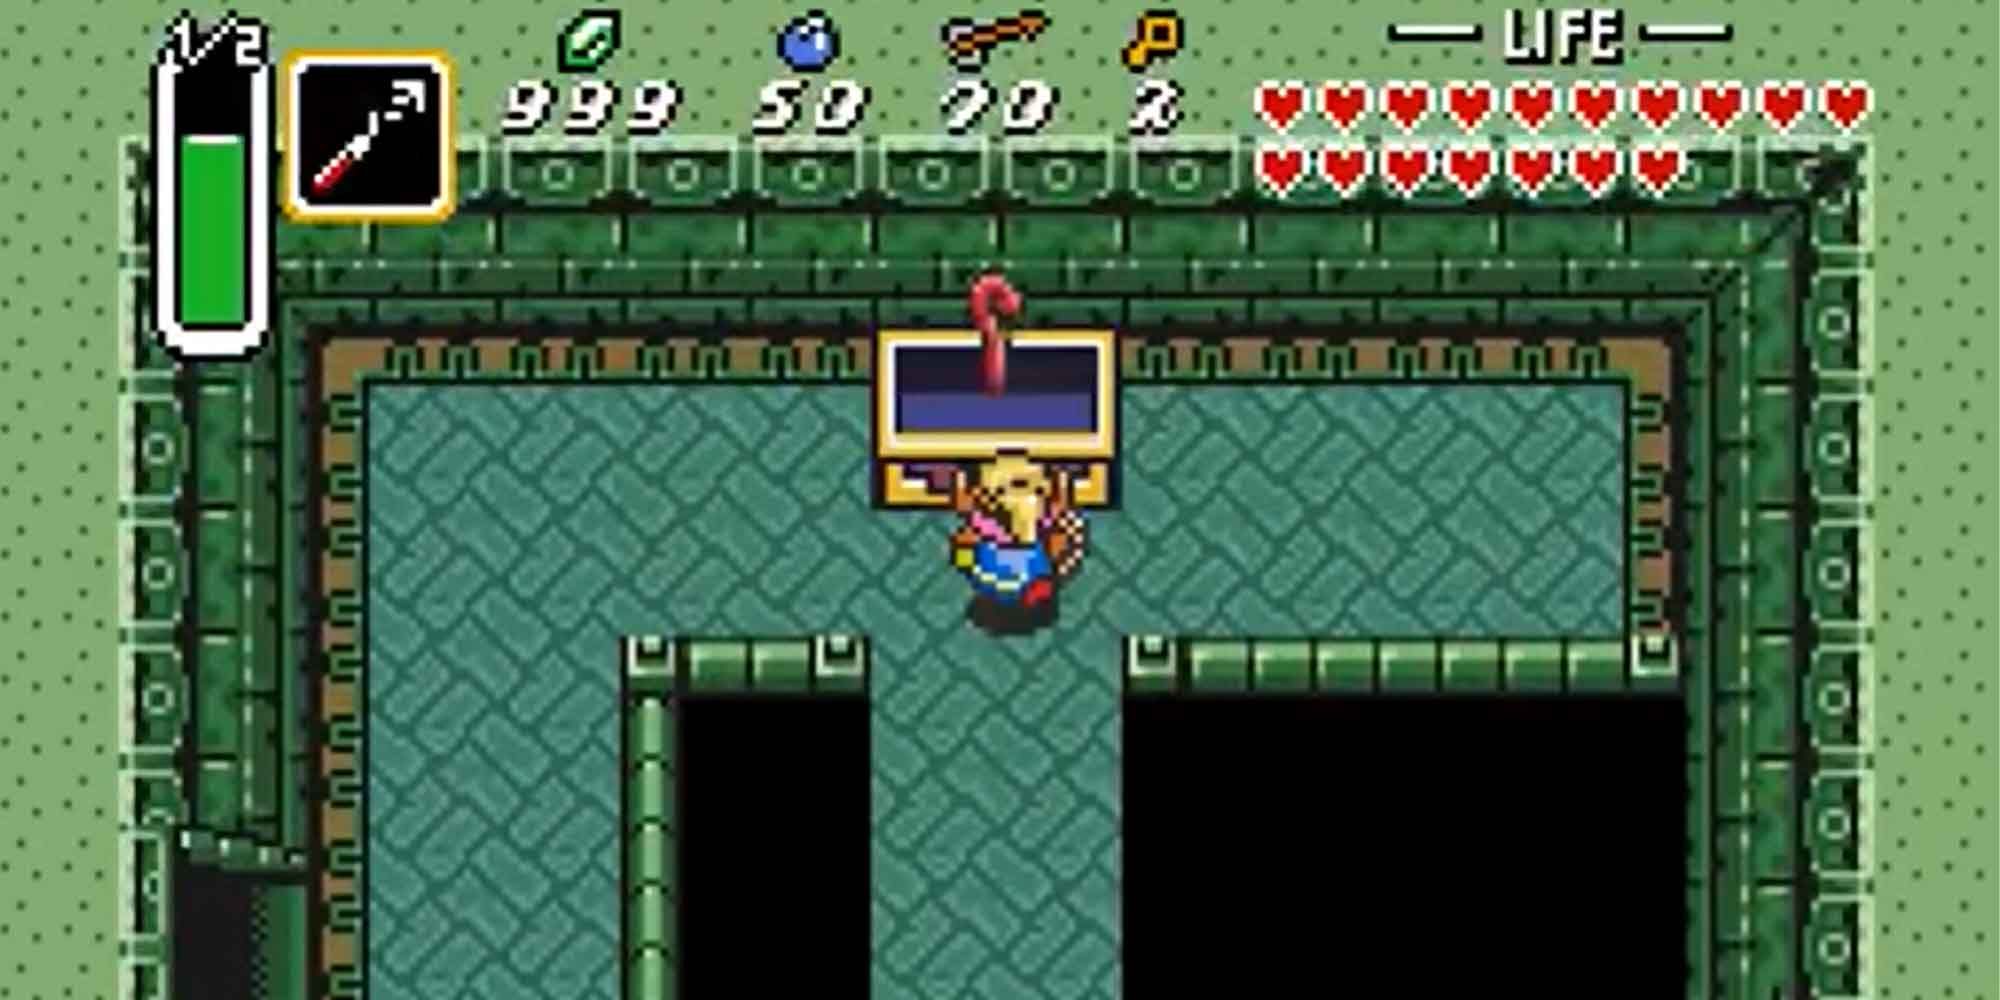 Finding the Cane of Somaria in Legend of Zelda Link to the Past